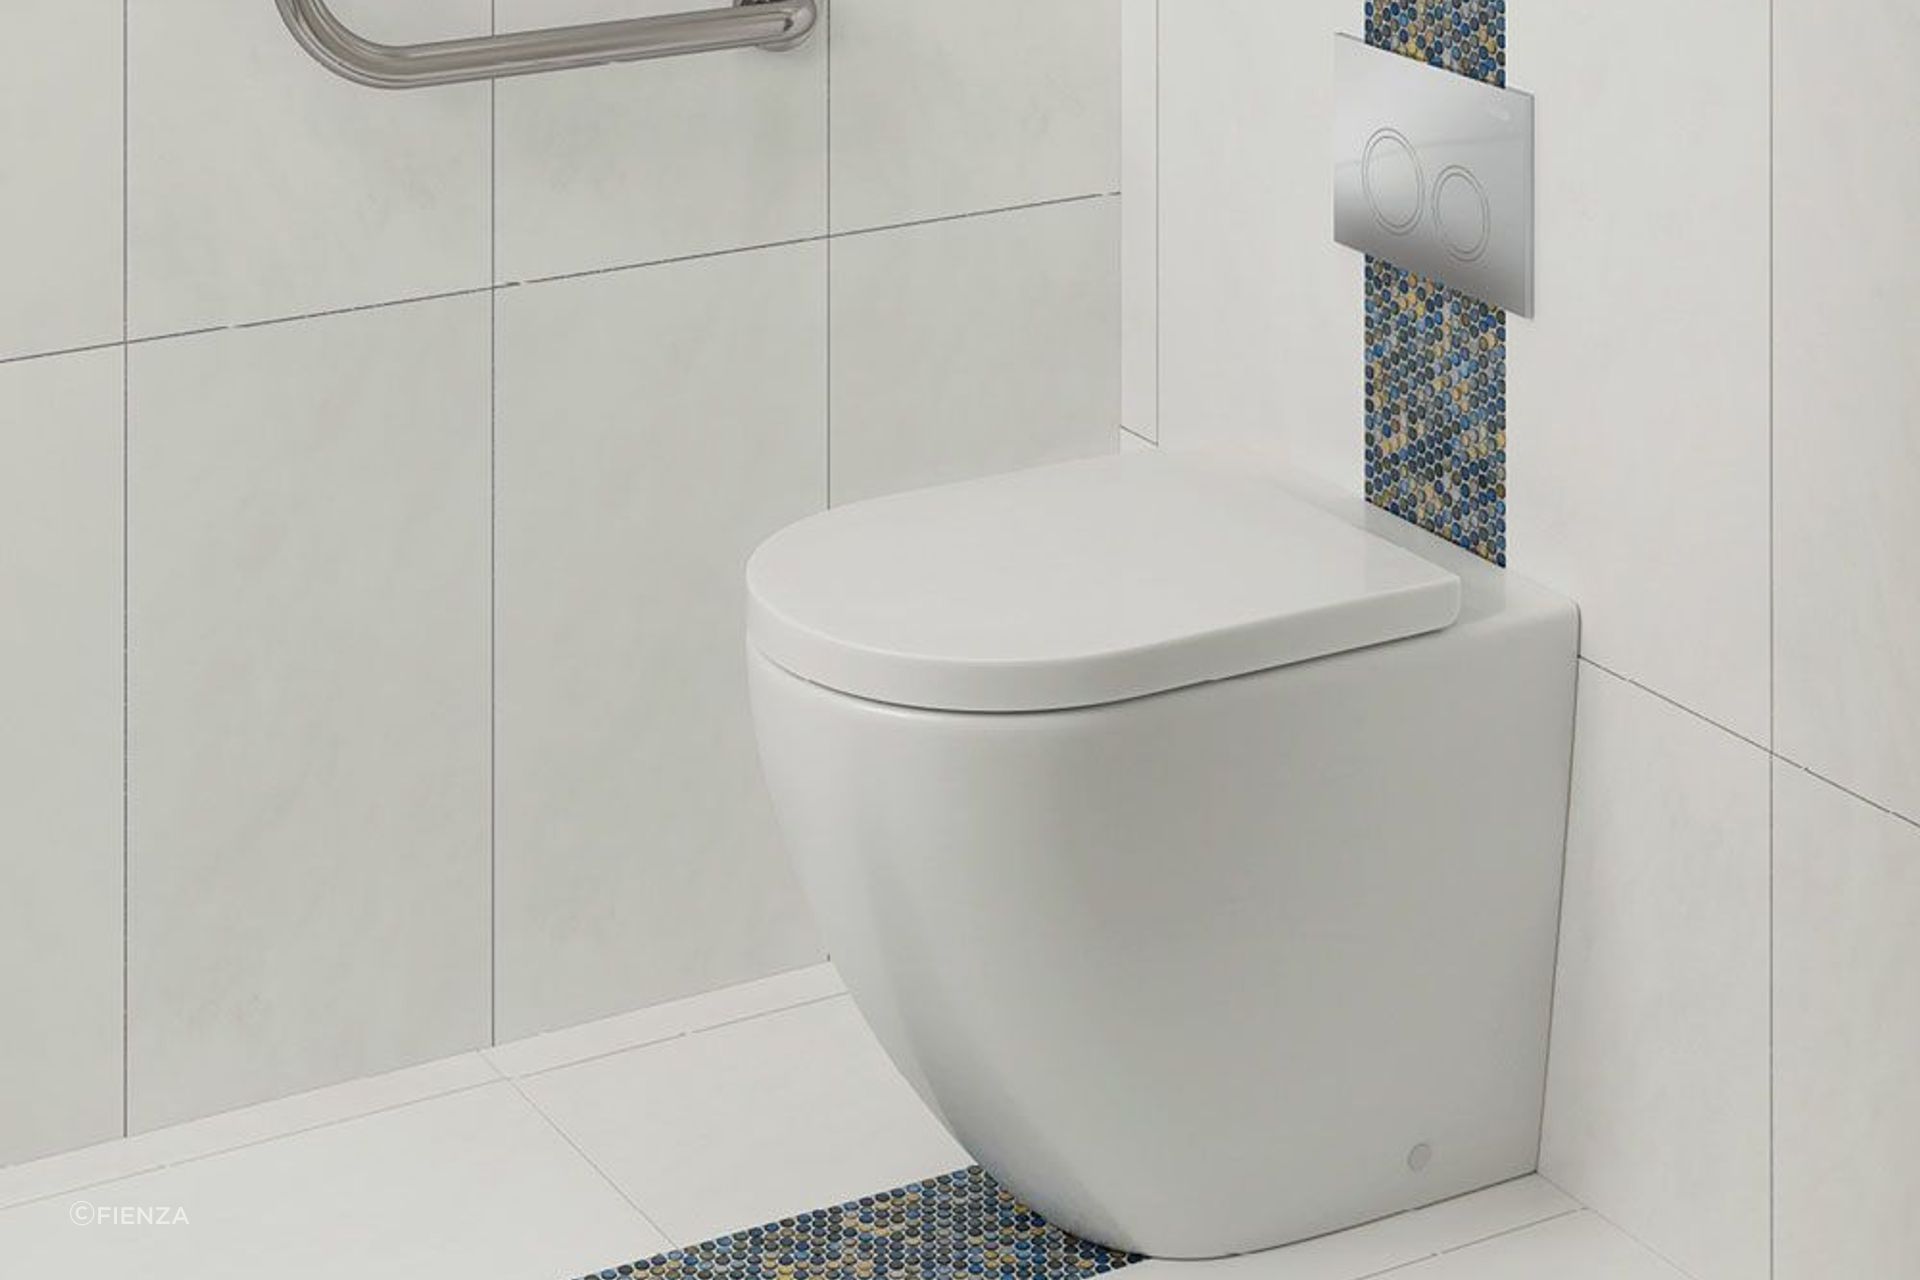 The location of a new toilet can affect the installation price.